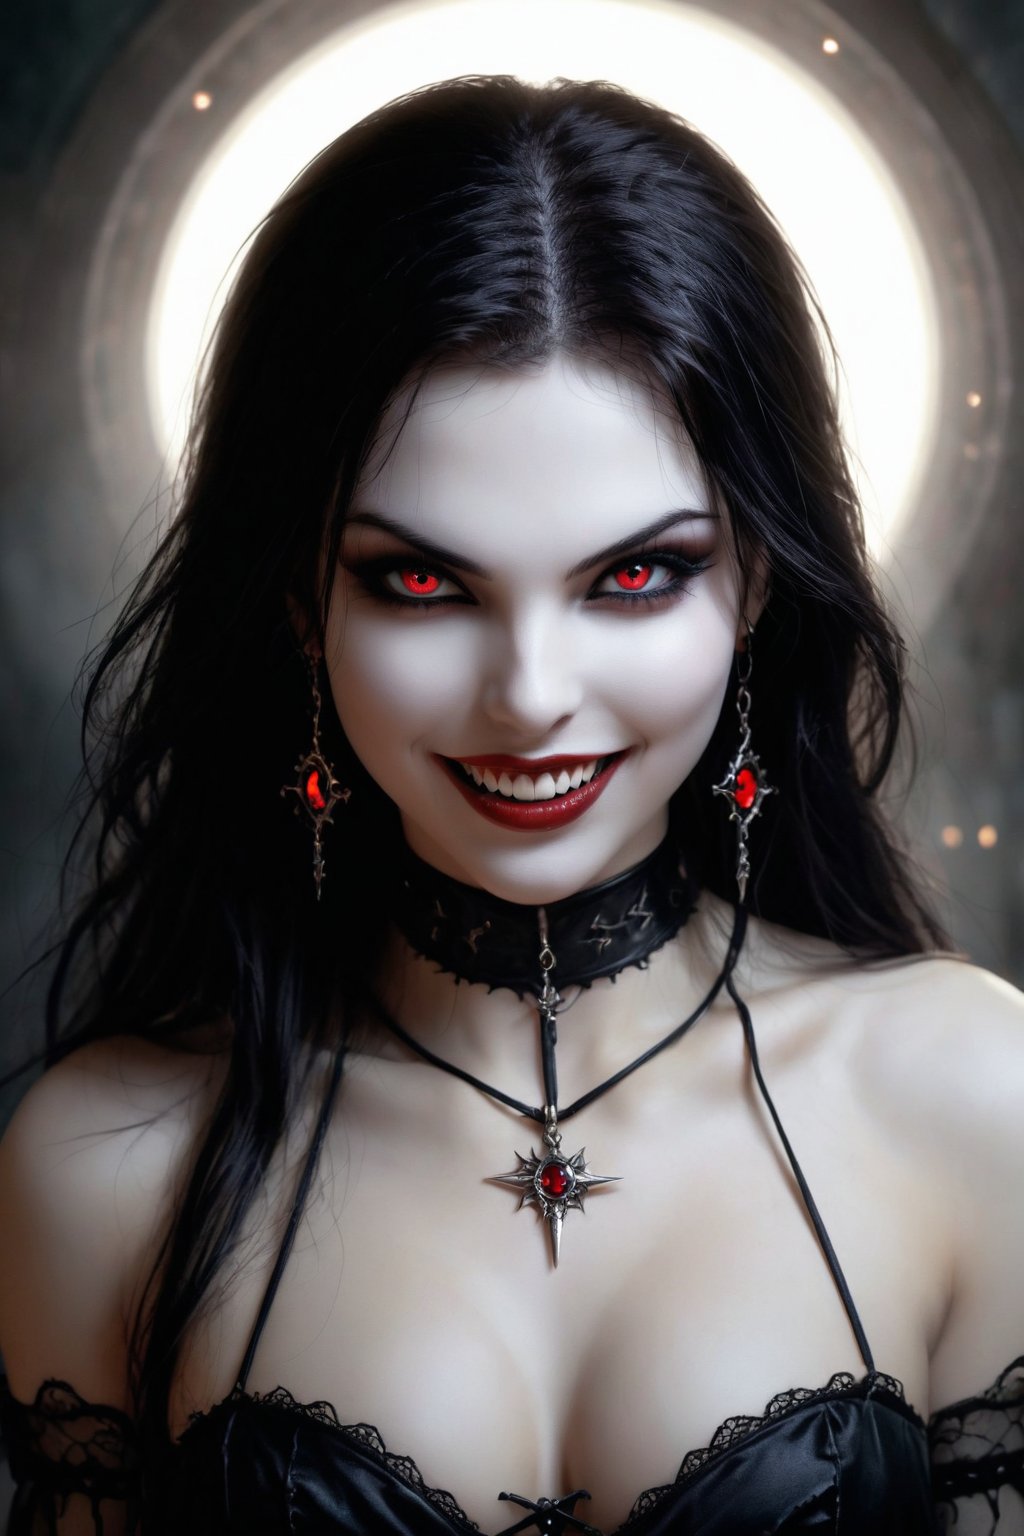 Official Art, Unity 8K Wallpaper, Super Detailed, Beautiful and Aesthetic, Masterpiece, Top Quality, uncanny valley, vampiress, perfect eyes, perfect face, perfect mouth, perfect teeth, perfect hands, perfect fingers, flirtatious, pure evil, evil smile, wicked expression, sexy, sinister, widow maker, dark tatoos, witchcraft theme background, by Luis Royo, More Reasonable Details